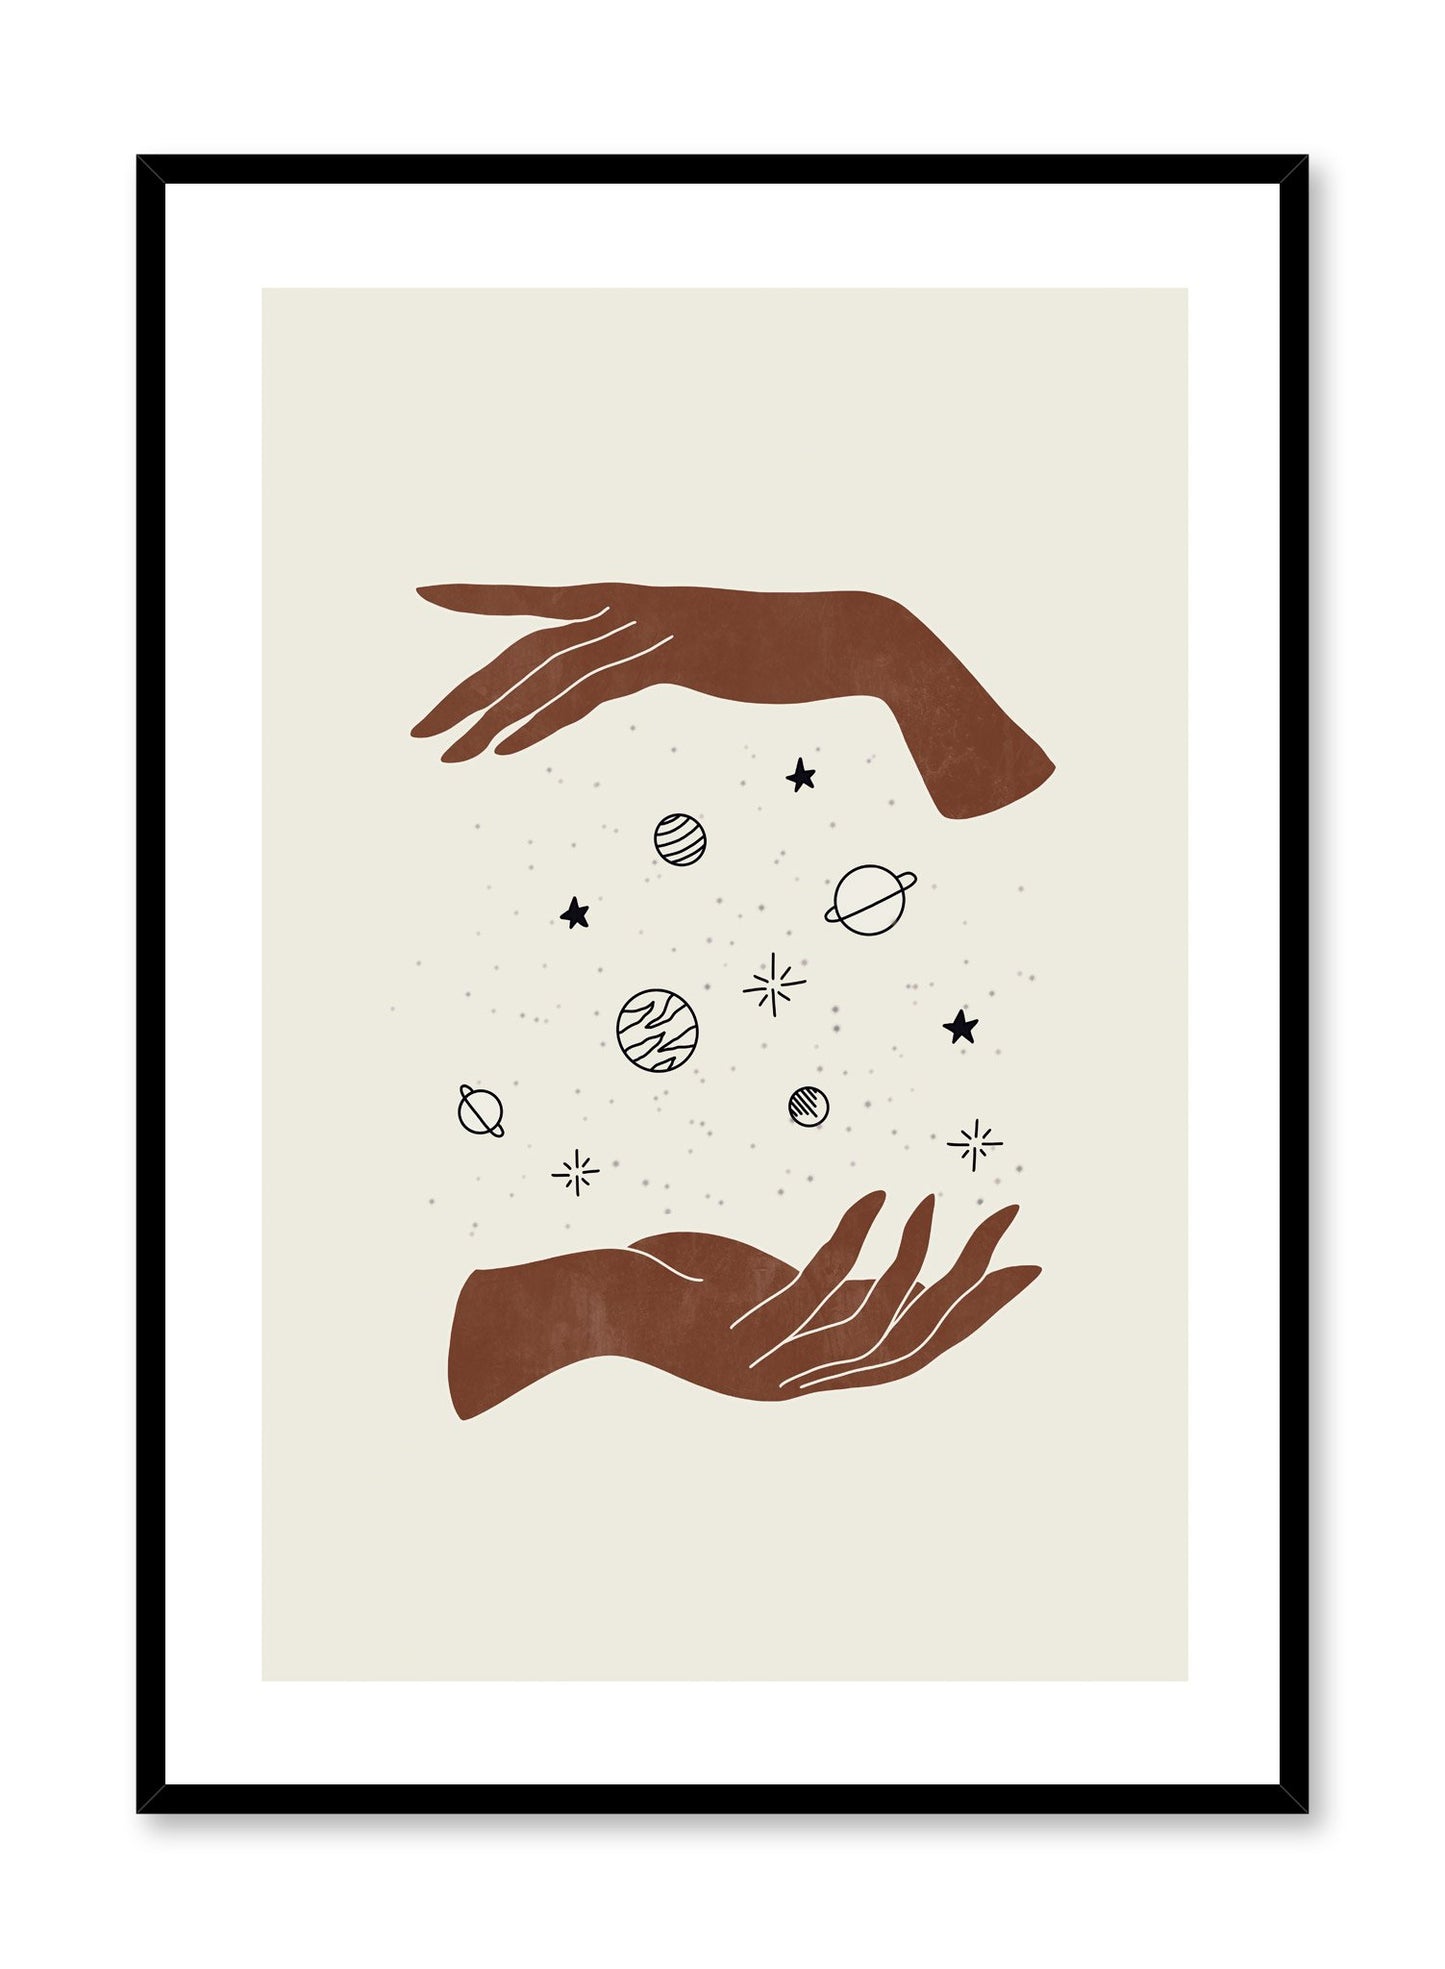 Celestial illustration poster by Opposite Wall with hands holding the universe